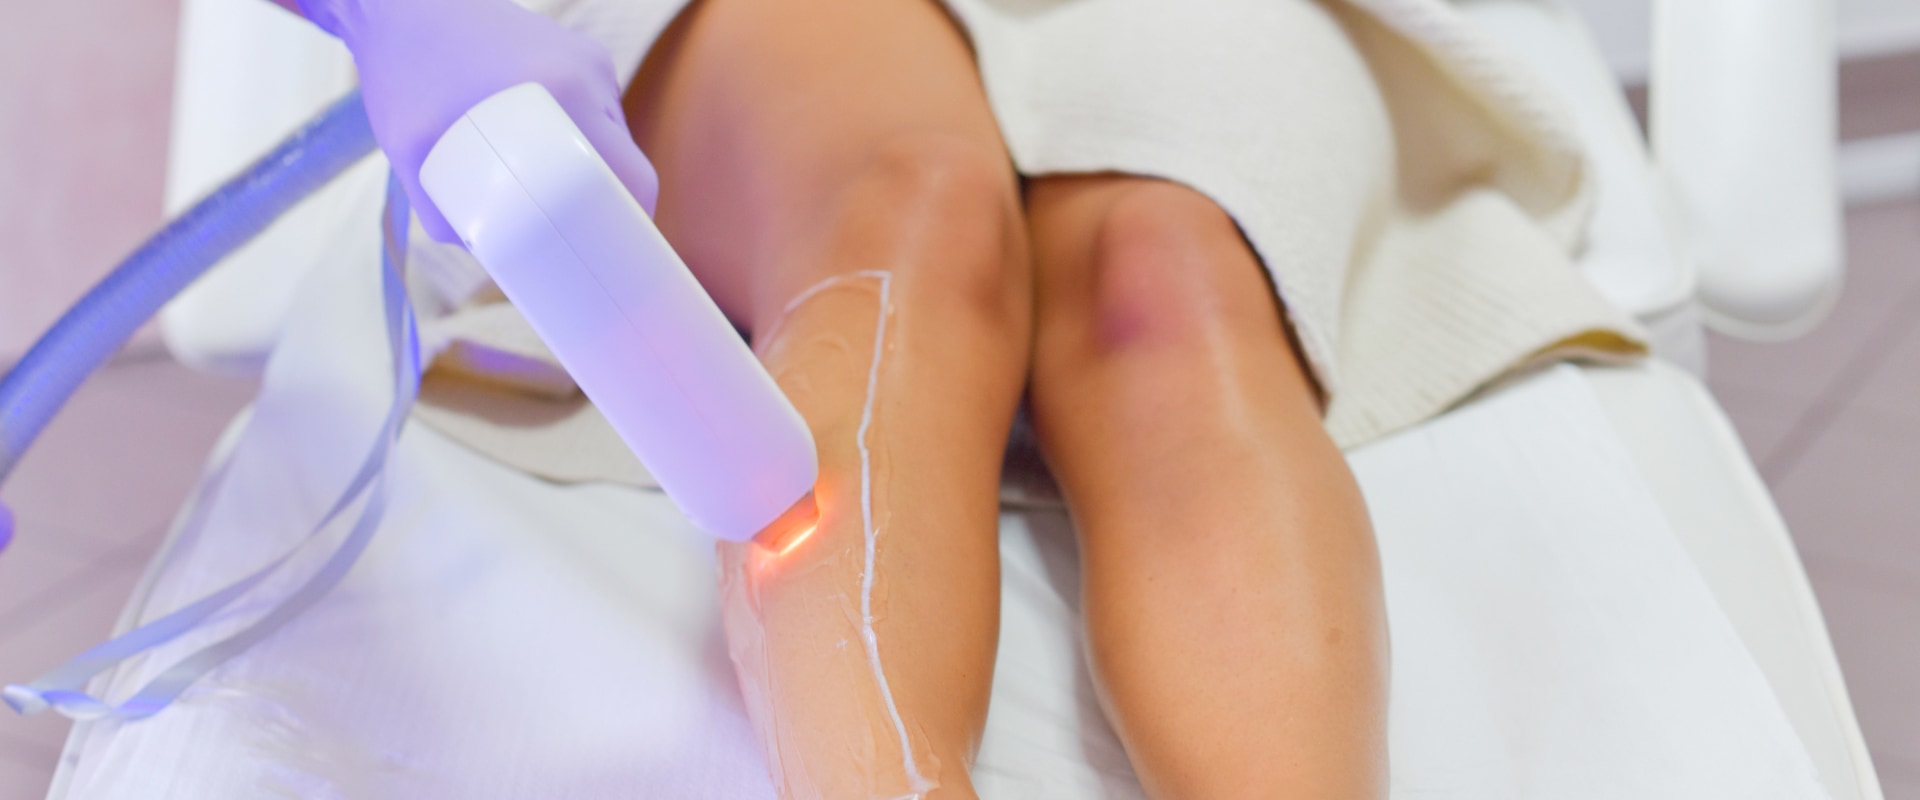 Increased Self-Esteem: The Psychological Benefits of Laser Hair Removal